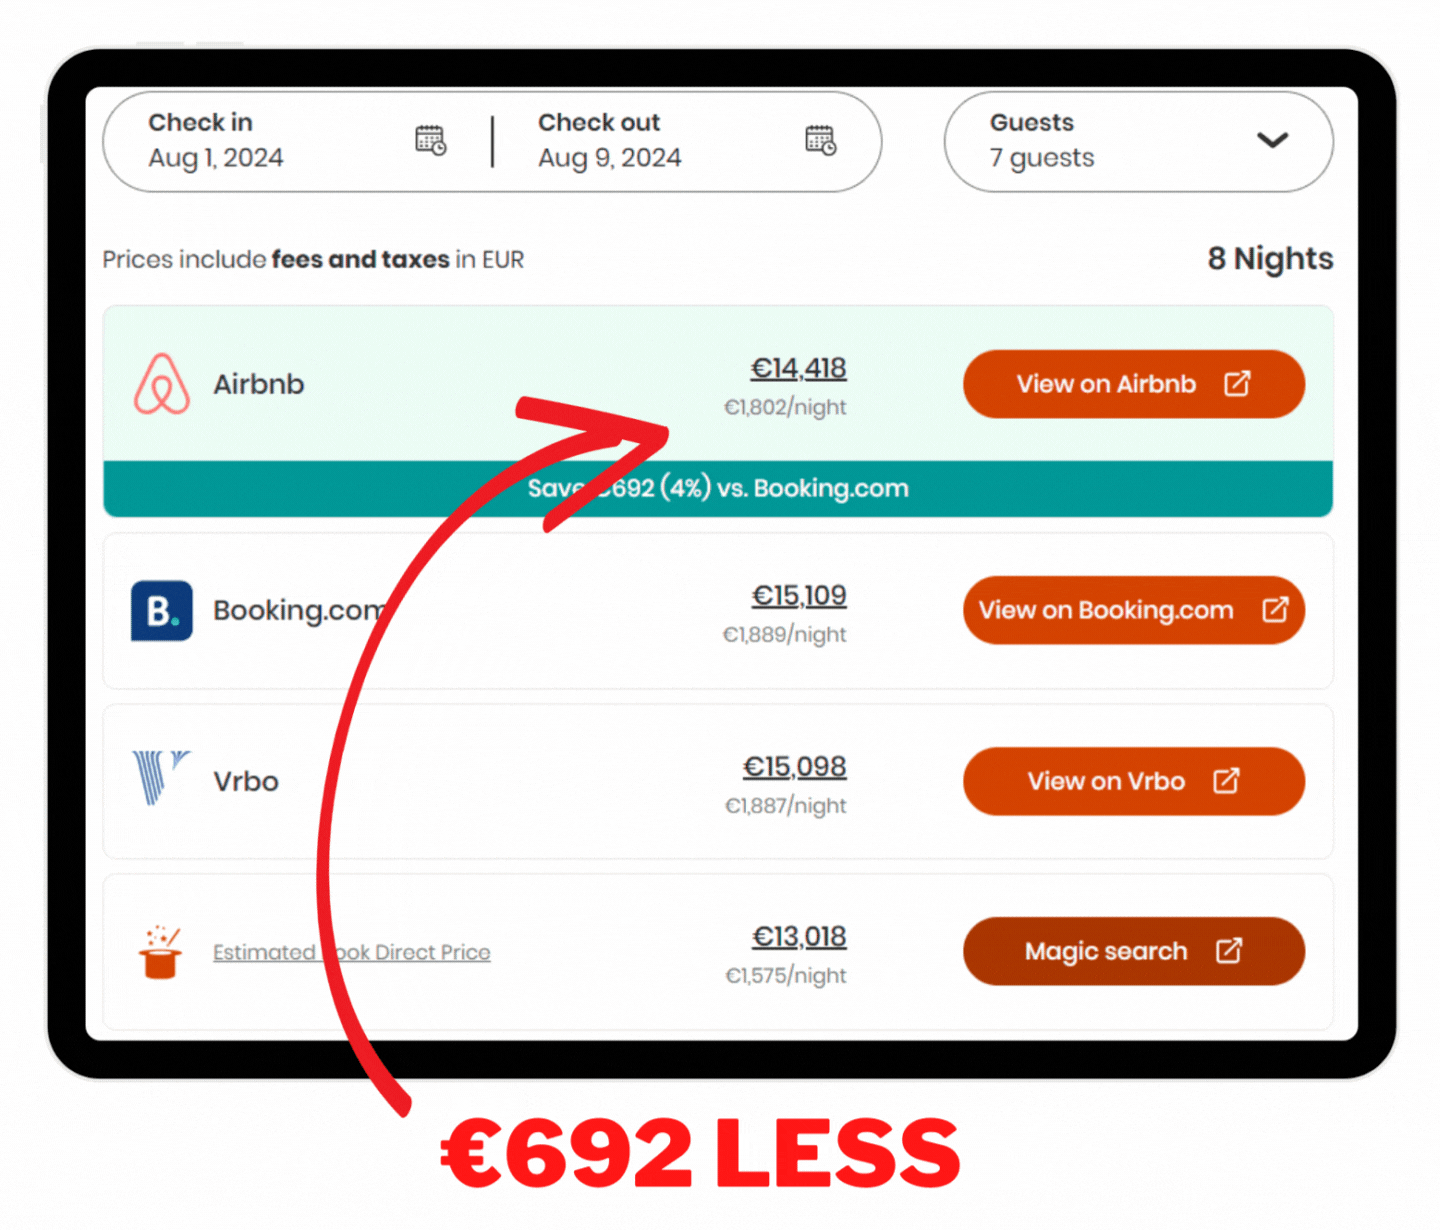 Save nearly 700 Euro when booking with Airbnb